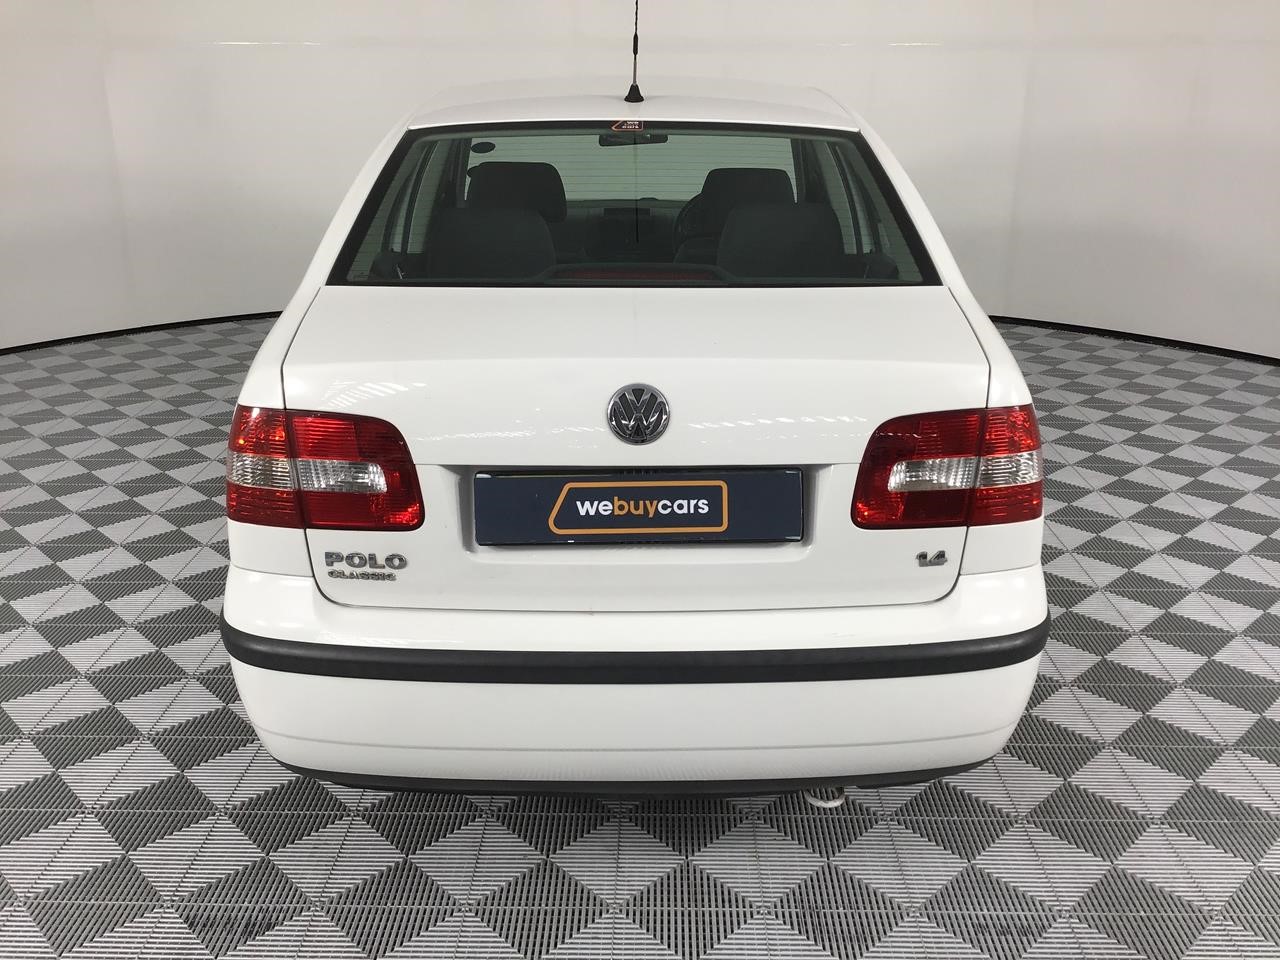 Used 2008 Volkswagen Polo Classic 1.4 Trendline for sale